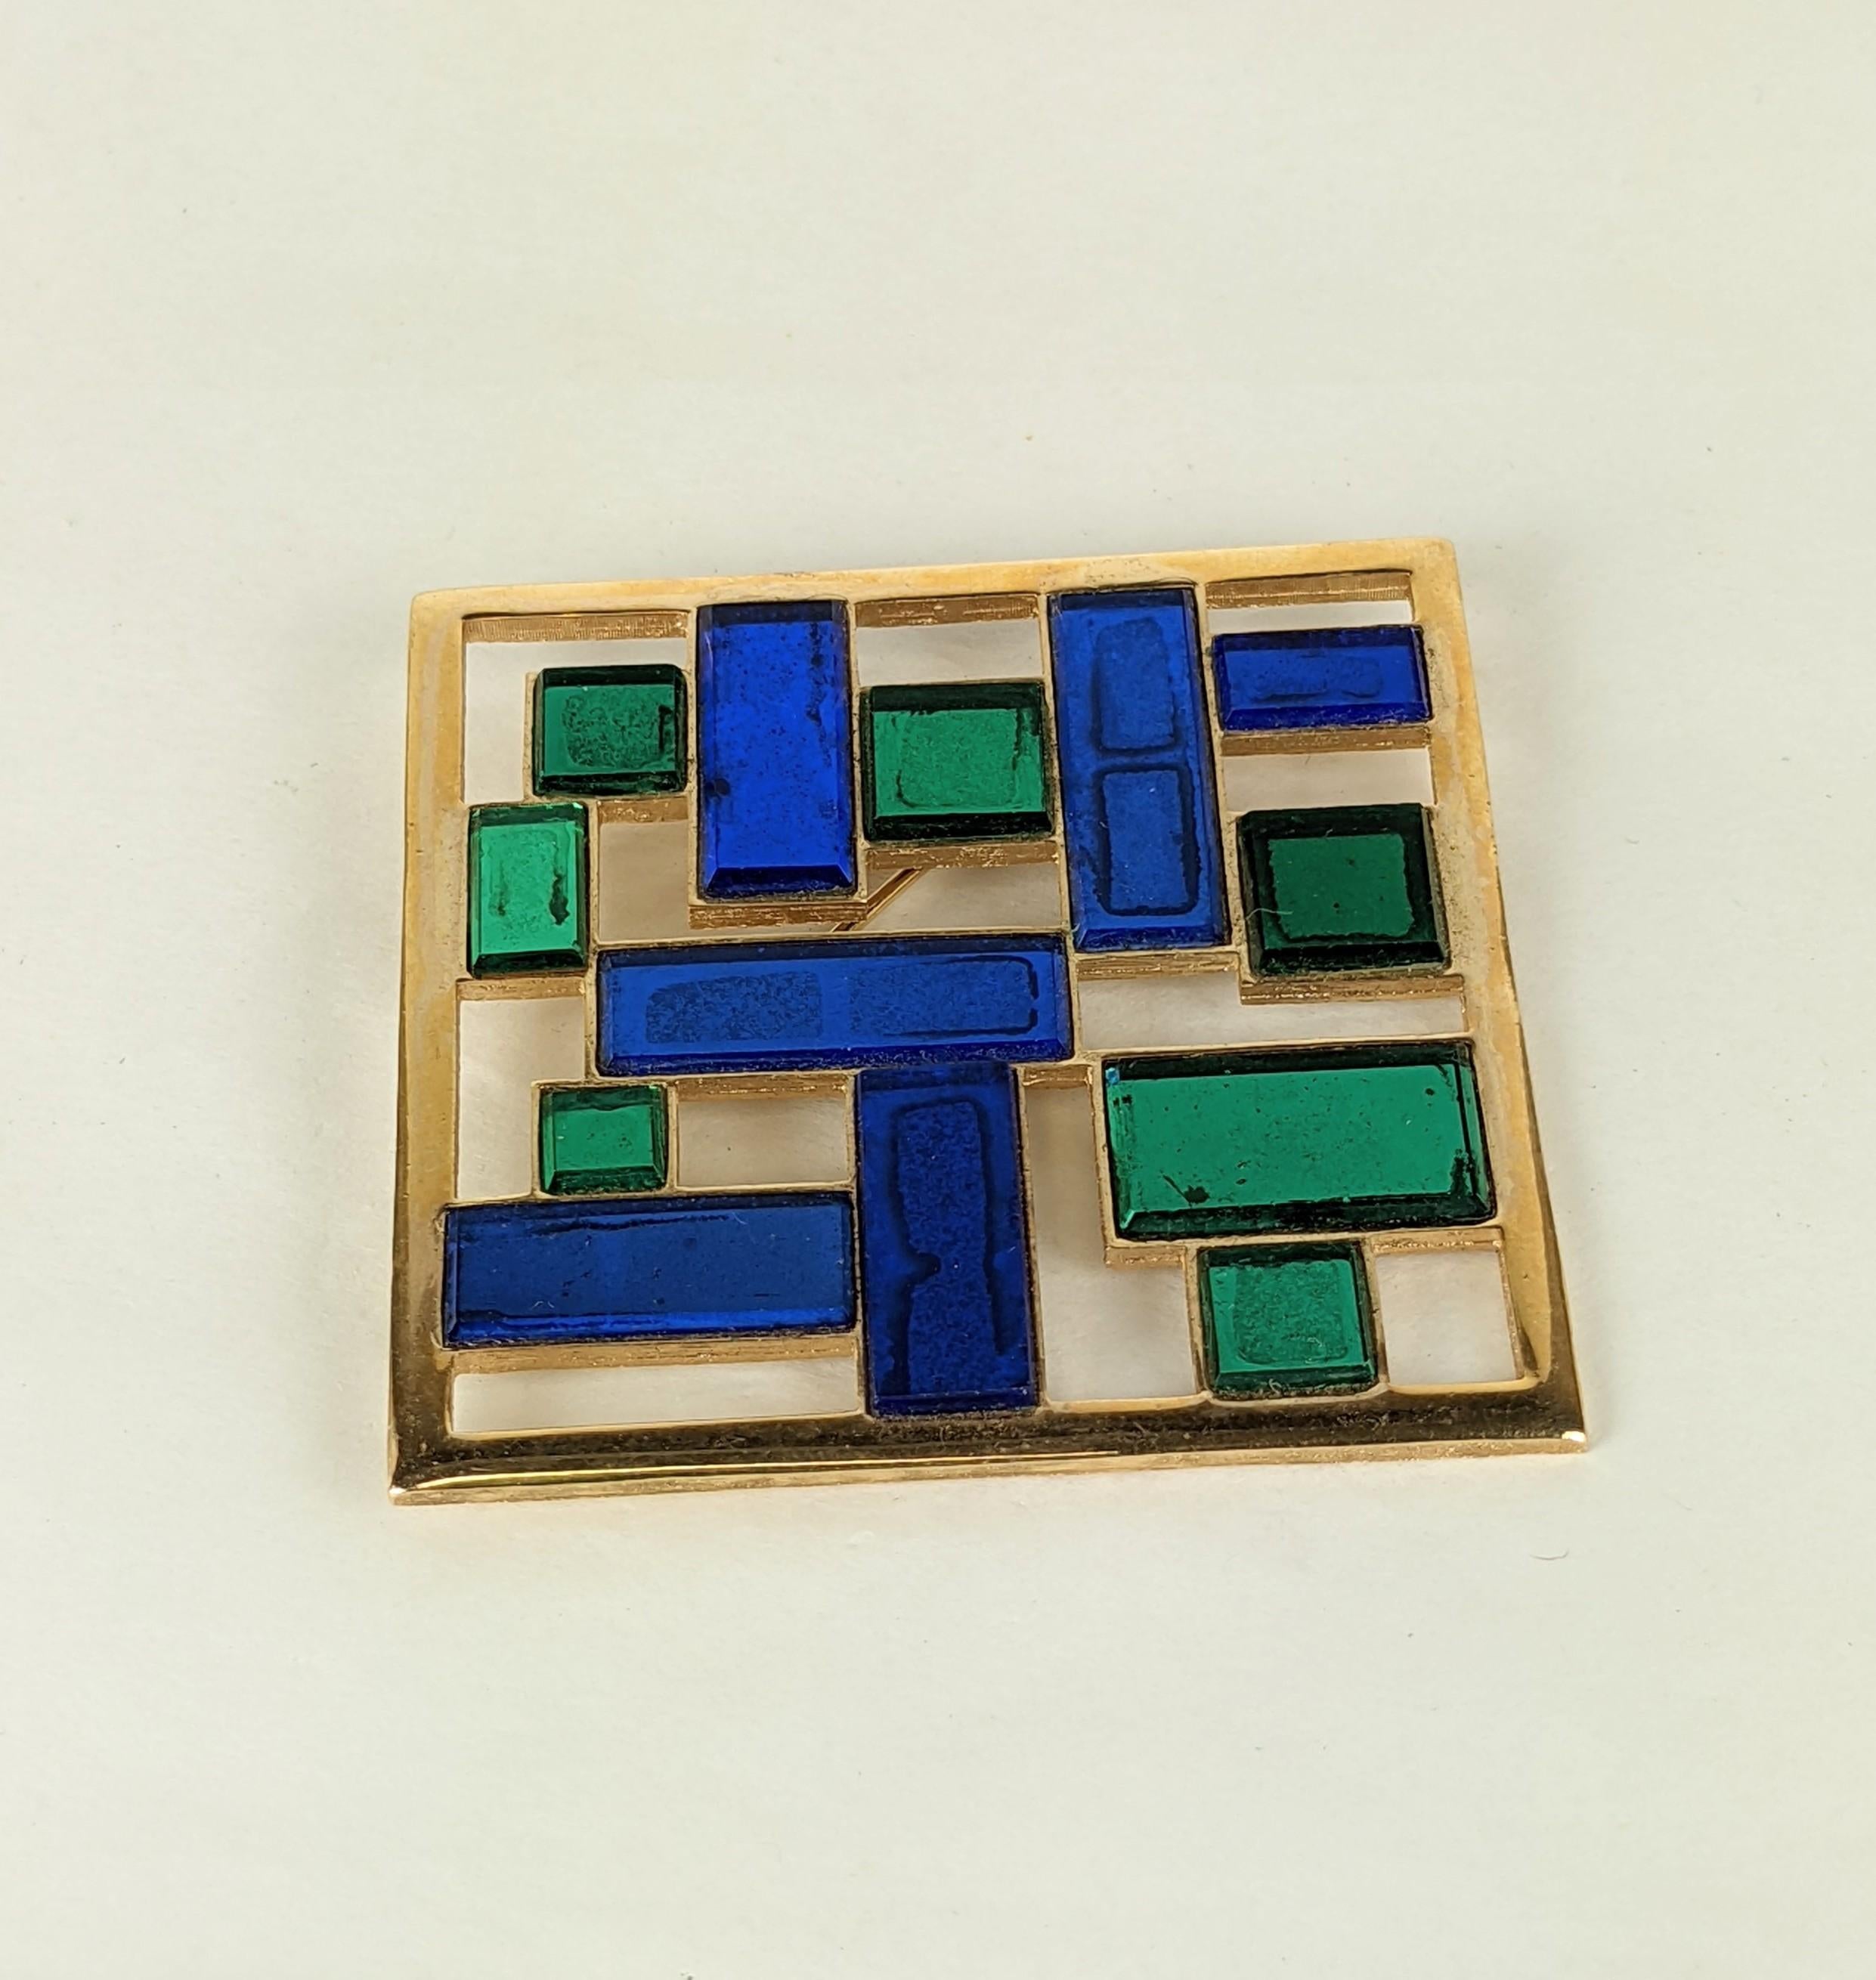 Trifari Mirrored Mosaic Pop Art Brooch from the 1960's. Panels of vibrant blue and emerald mirror are arranged in a mosiac style.  Matching pendant available.  2.25